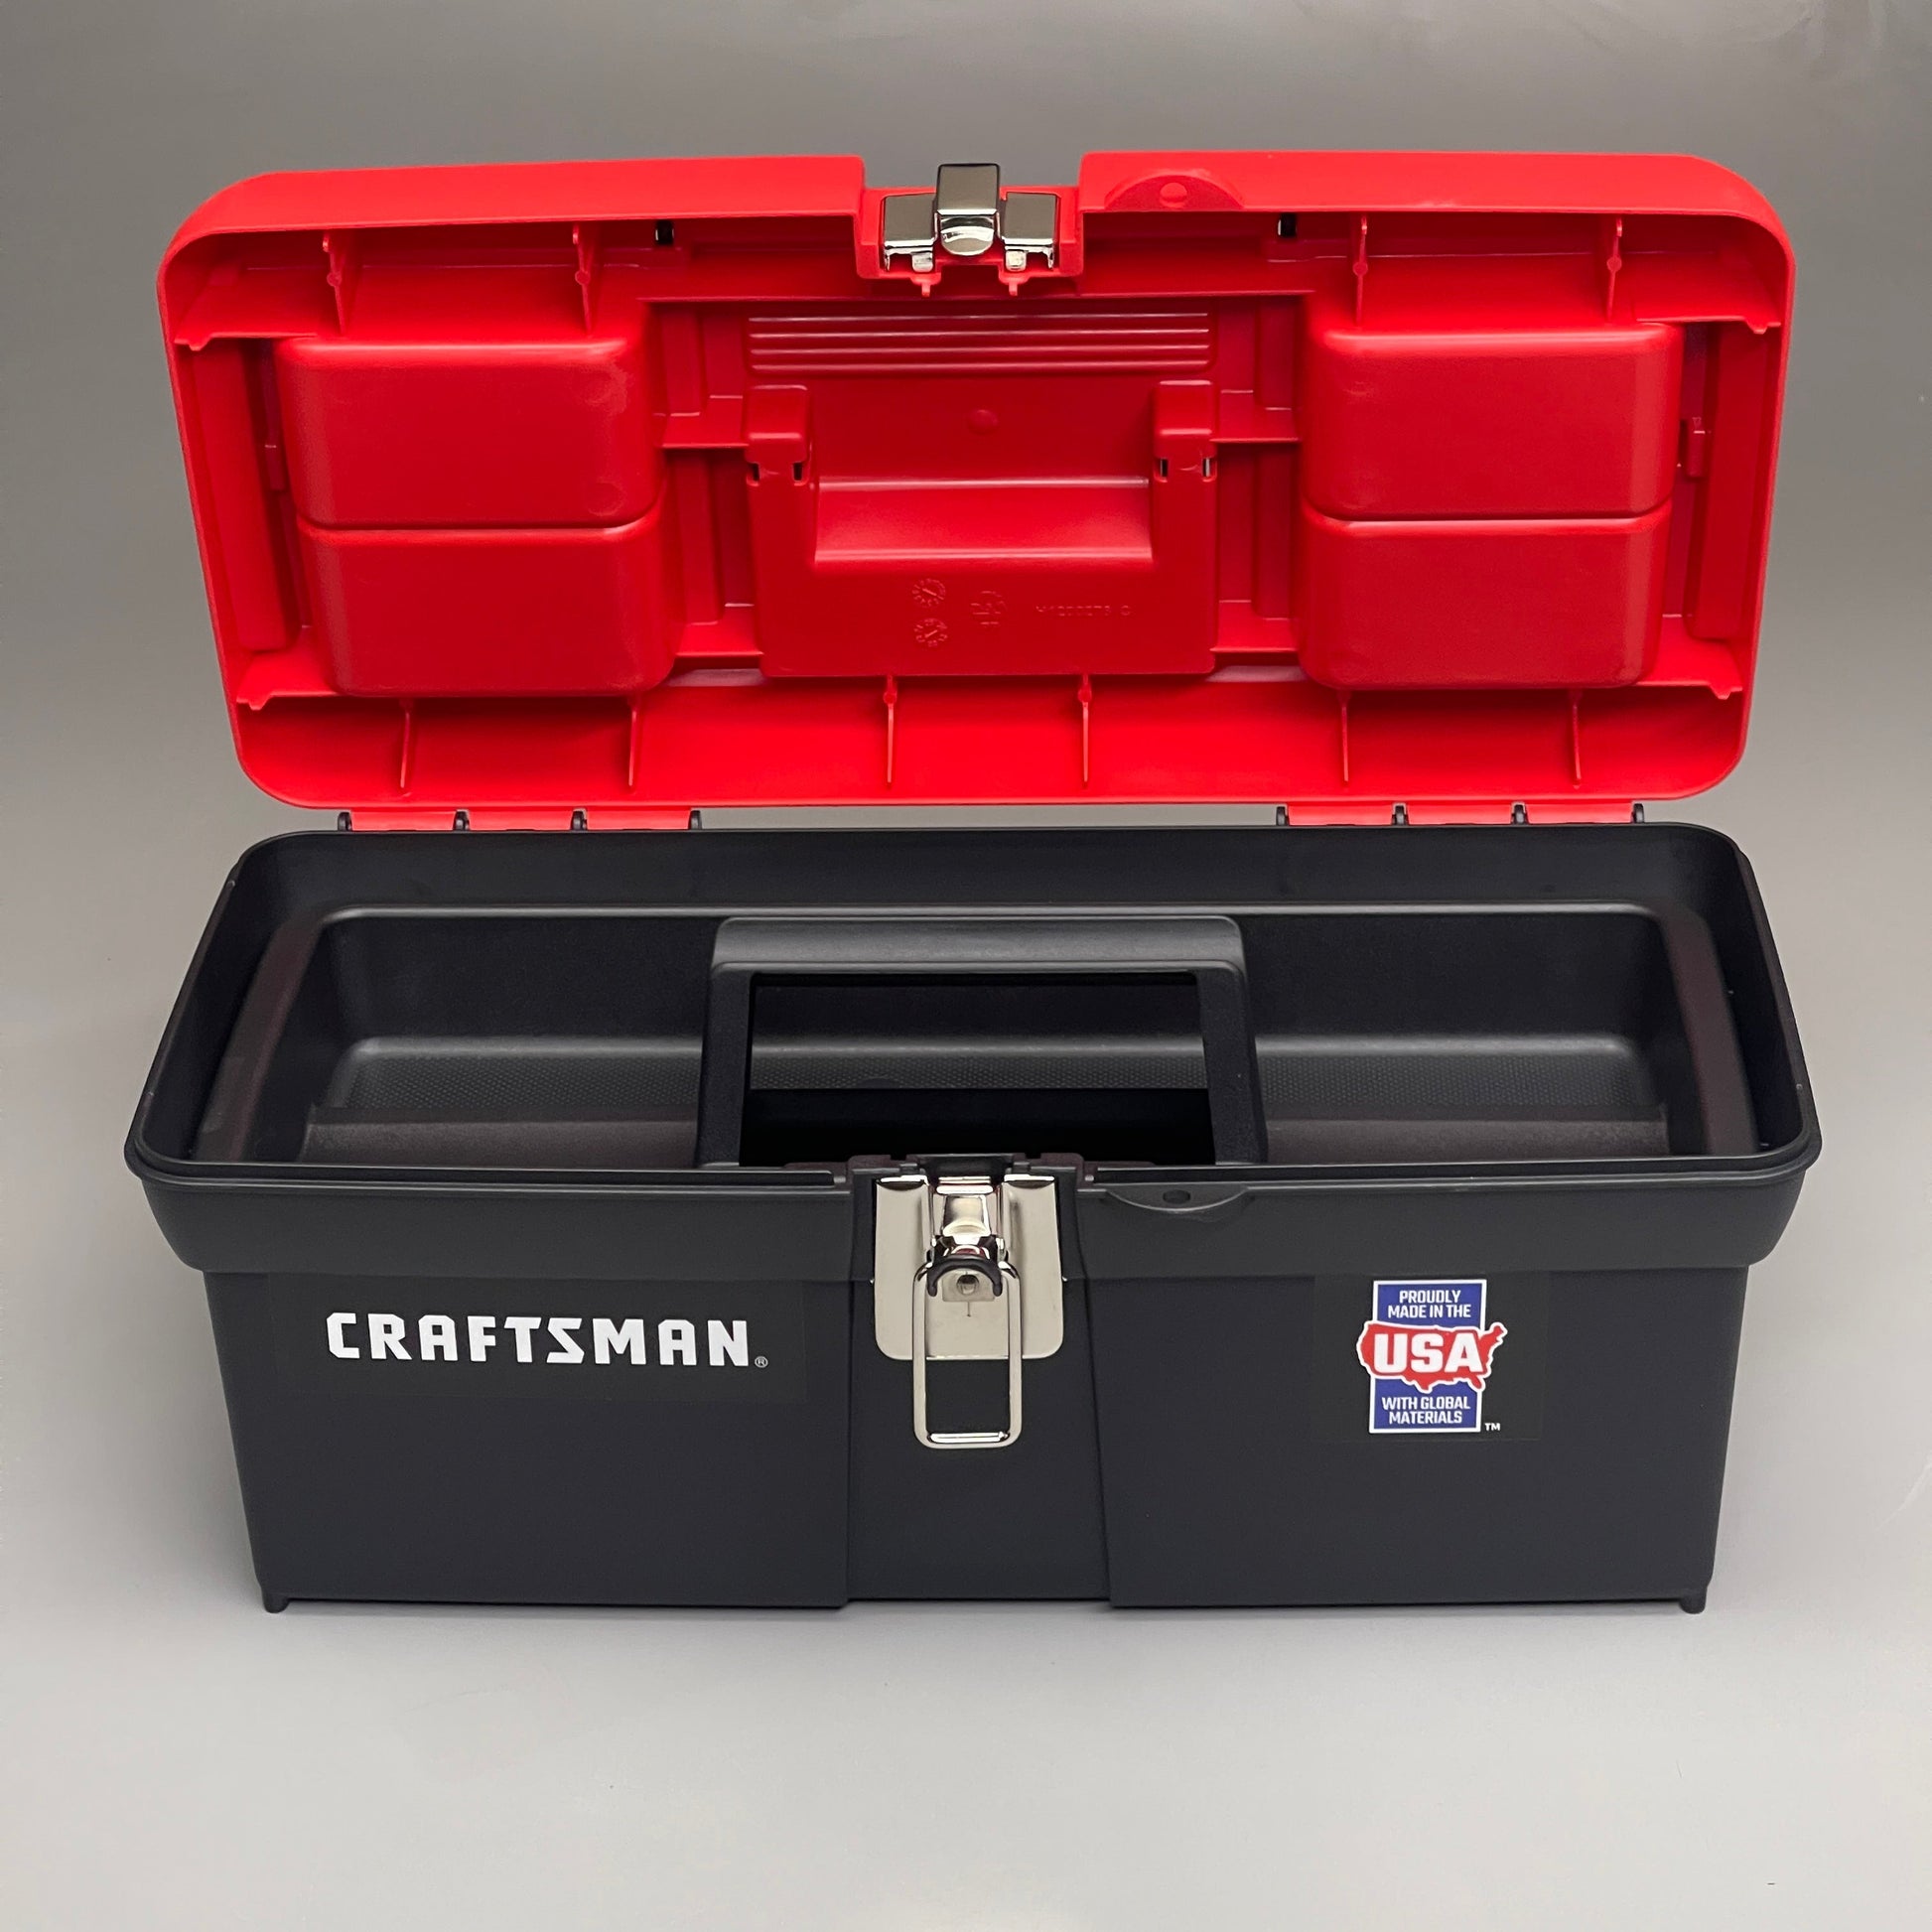 CRAFTSMAN Plastic Tool Box - 16-in - Red and Black CMST16901